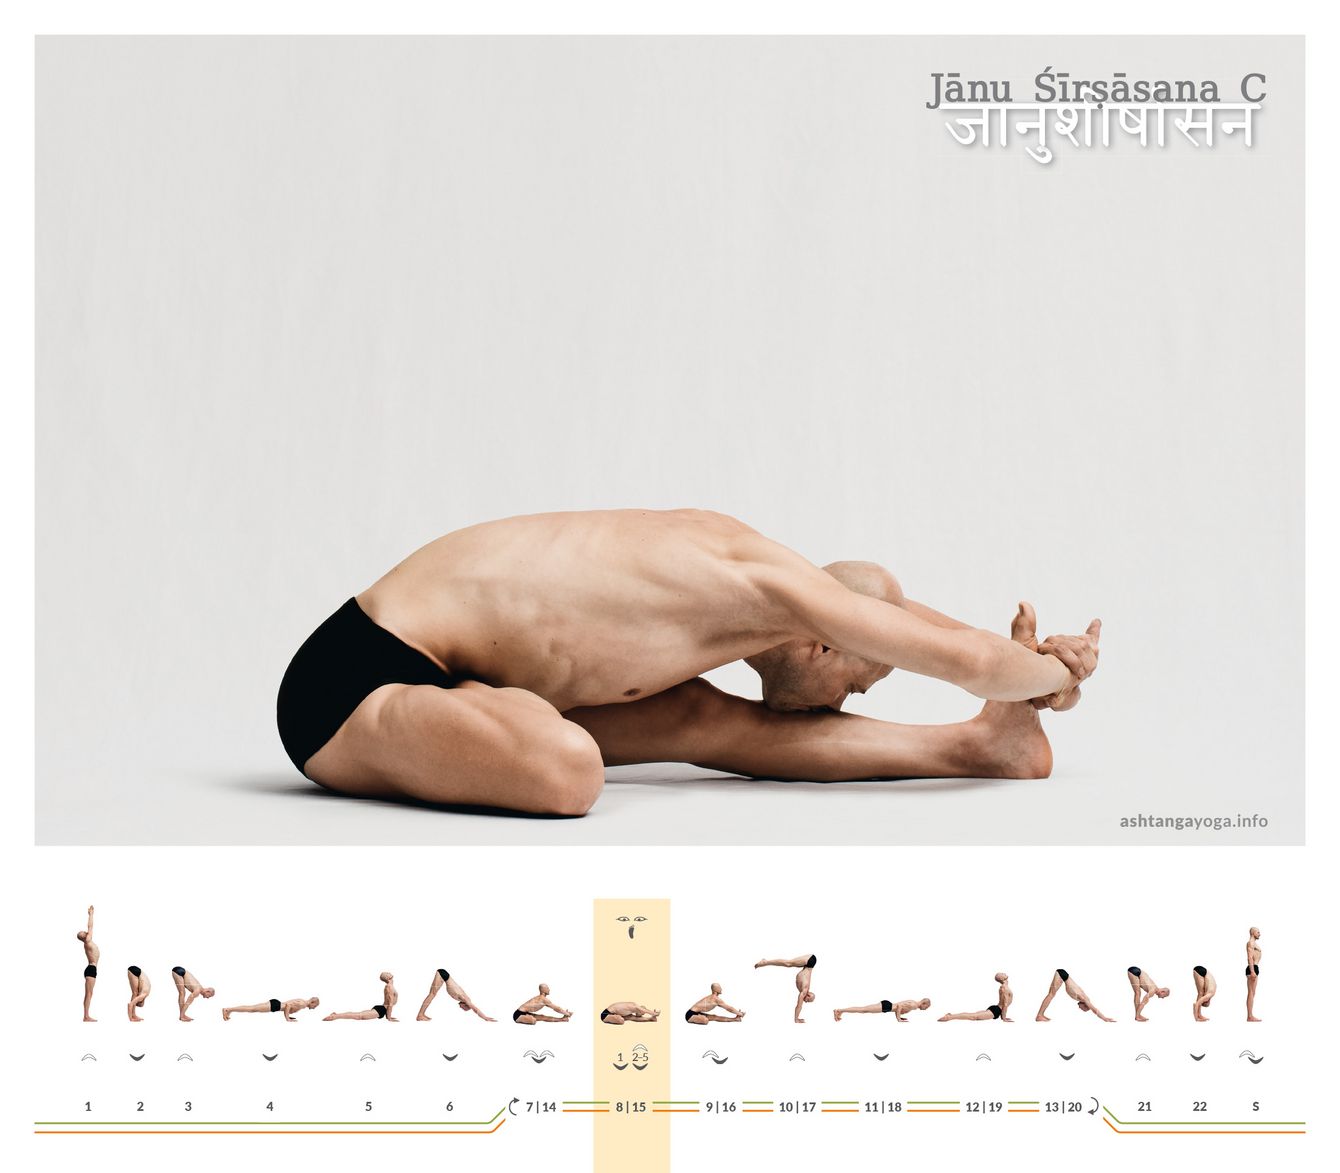 In the third variant of the “Head and Knee pose” places the ball of the foot down with the heel raised and clamps the foot between both thighs - Janu Shirshasana C.